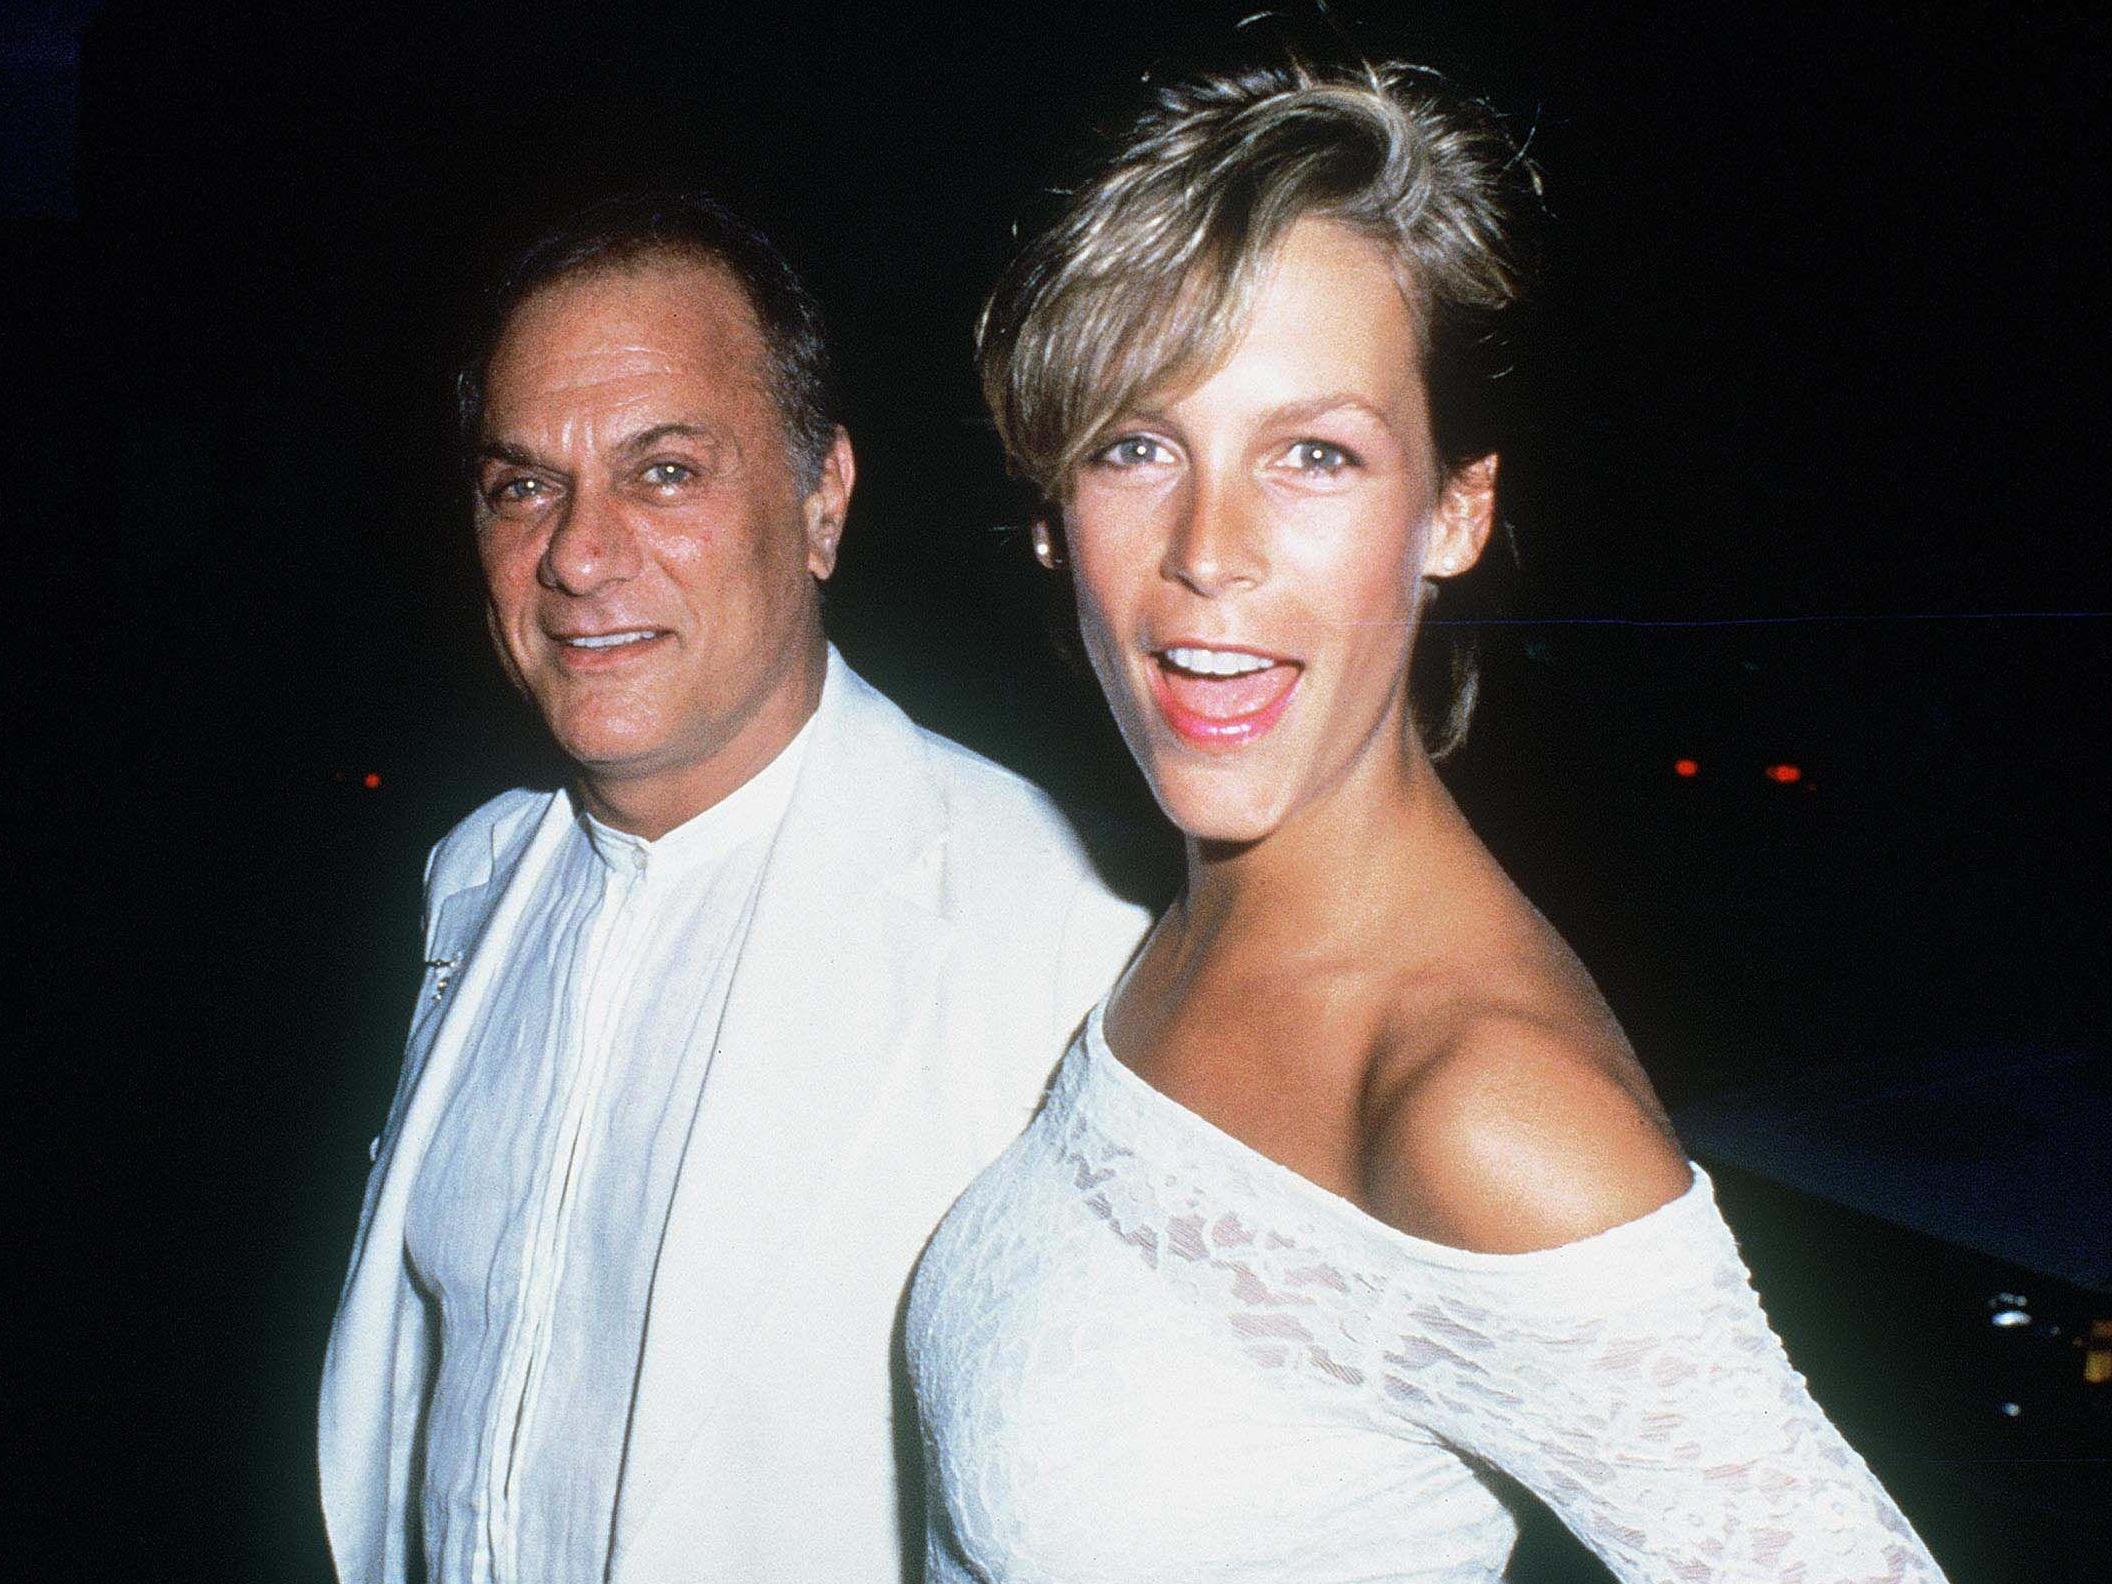 Jamie Lee Curtis and her father, Tony Curtis